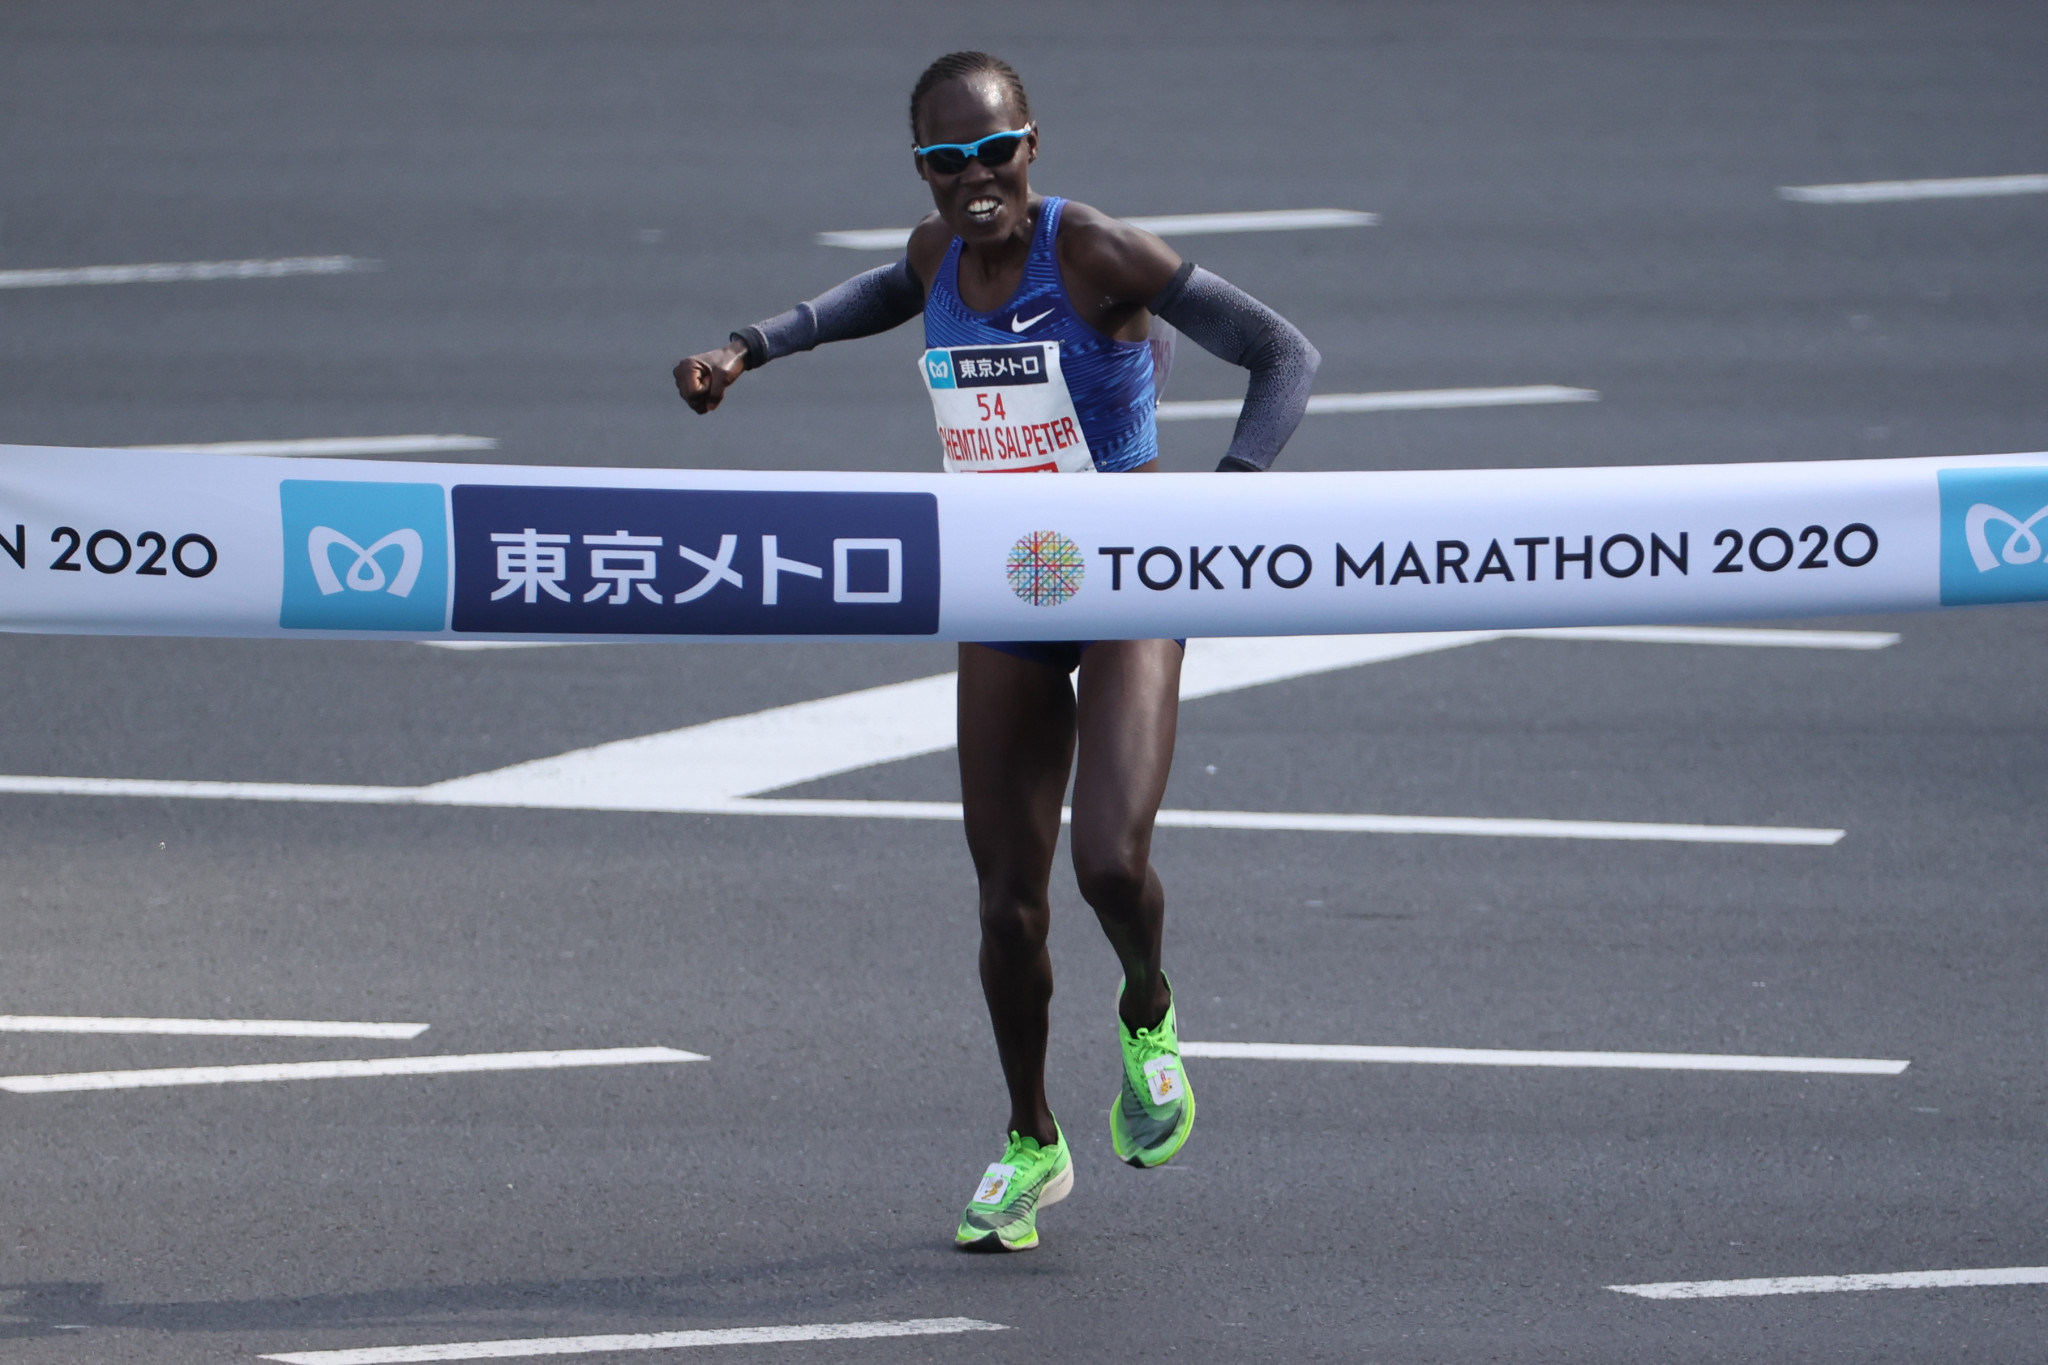 Lonah Chemtai Salpeter won the women's race in a record time of 2 hours 17min 45sec at this year's Tokyo Marathon ©Getty Images